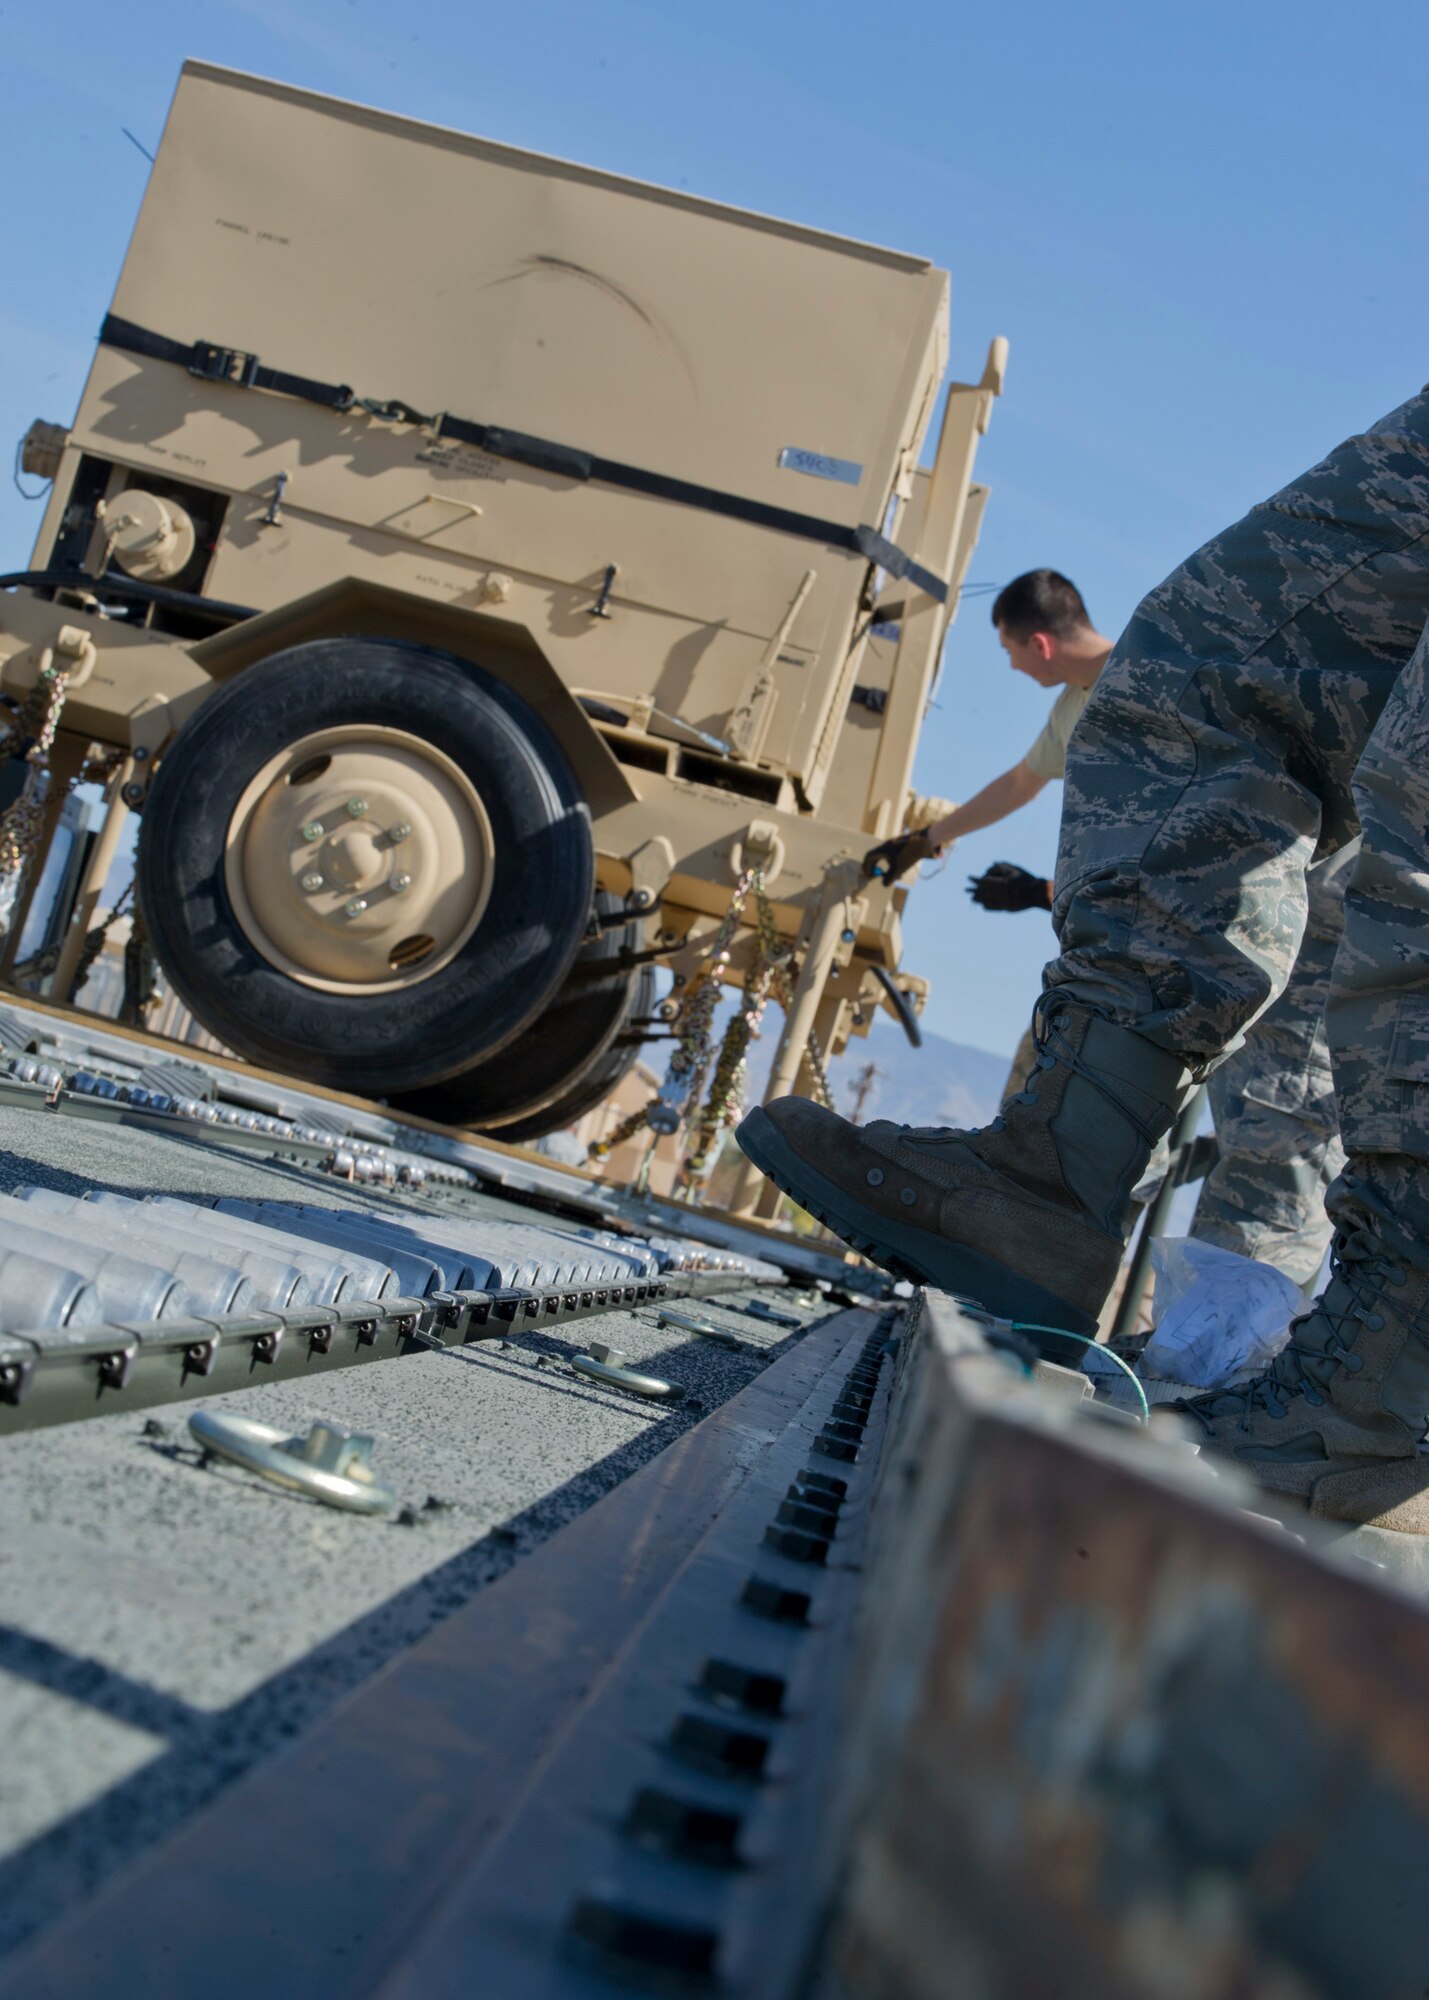 Personnel of the 49th Materiel Maintenance Squadron, load a pallet onto a 60,000-pound K-Loader at Holloman Air Force Base, N.M., Nov. 2. The 49th MMS was tasked with supporting the humanitarian relief efforts for the victims of Hurricane Sandy. In response to the tasking, the 49th MMS worked for 15 straight hours preparing more than 58,000 pounds of cargo spread across eight pallets. The cargo consisted of two water pumps capable of pumping 400 gallons of water a minute, 12,000 feet of hose, and two containers of system support items. (U.S. Air Force photo by Senior Airman DeAndre Curtiss/Released)